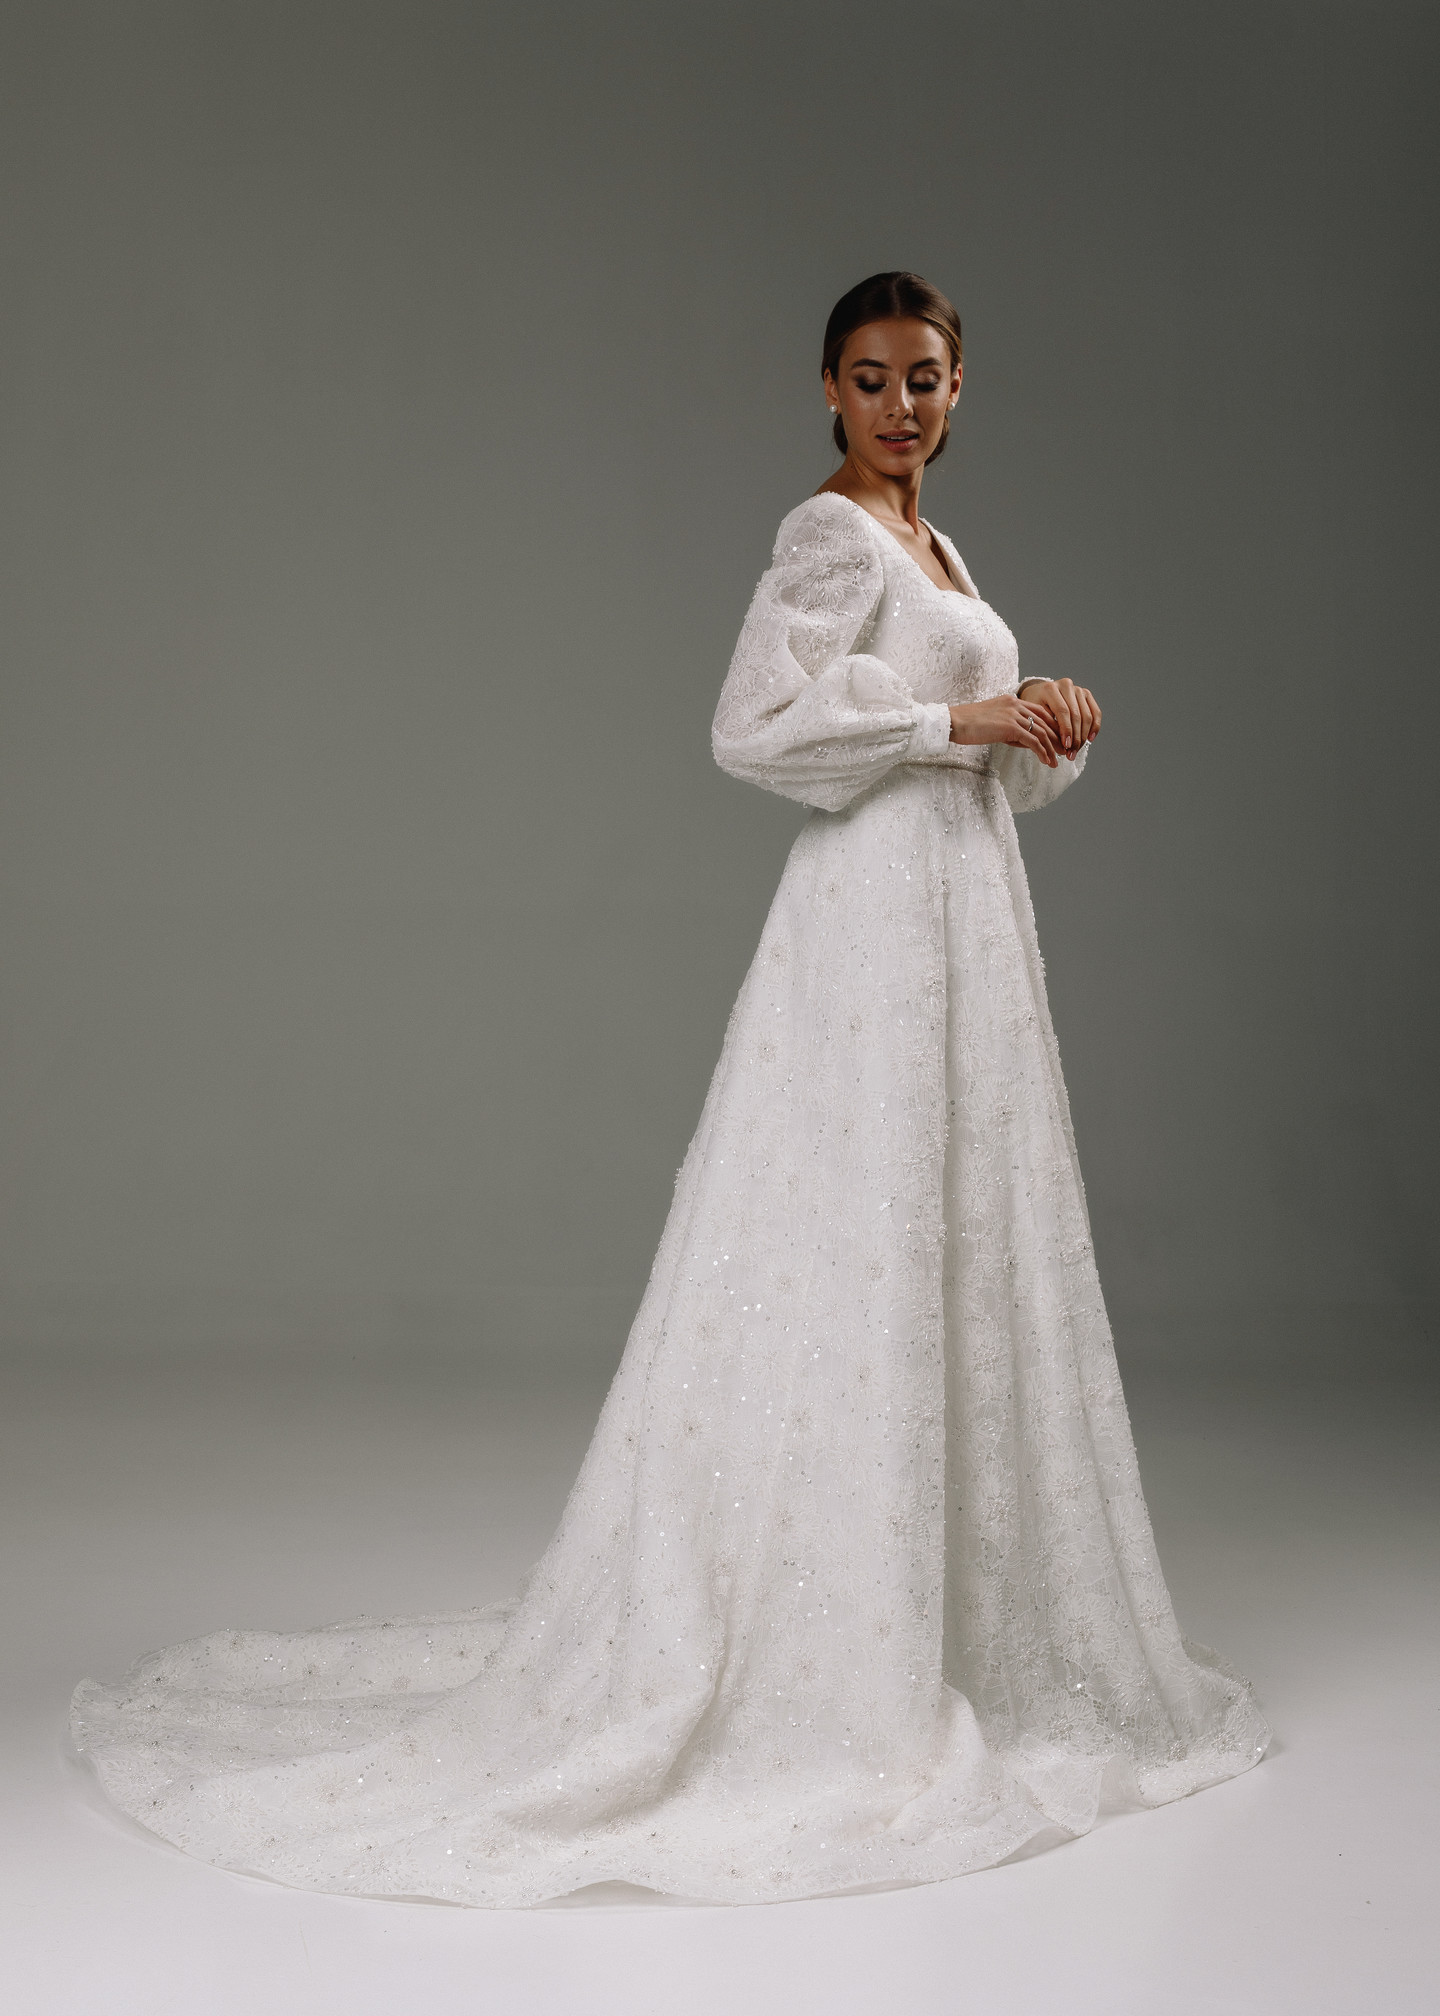 Bianca gown, 2020, couture, dress, bridal, off-white, lace, A-line, embroidery, sleeves, train